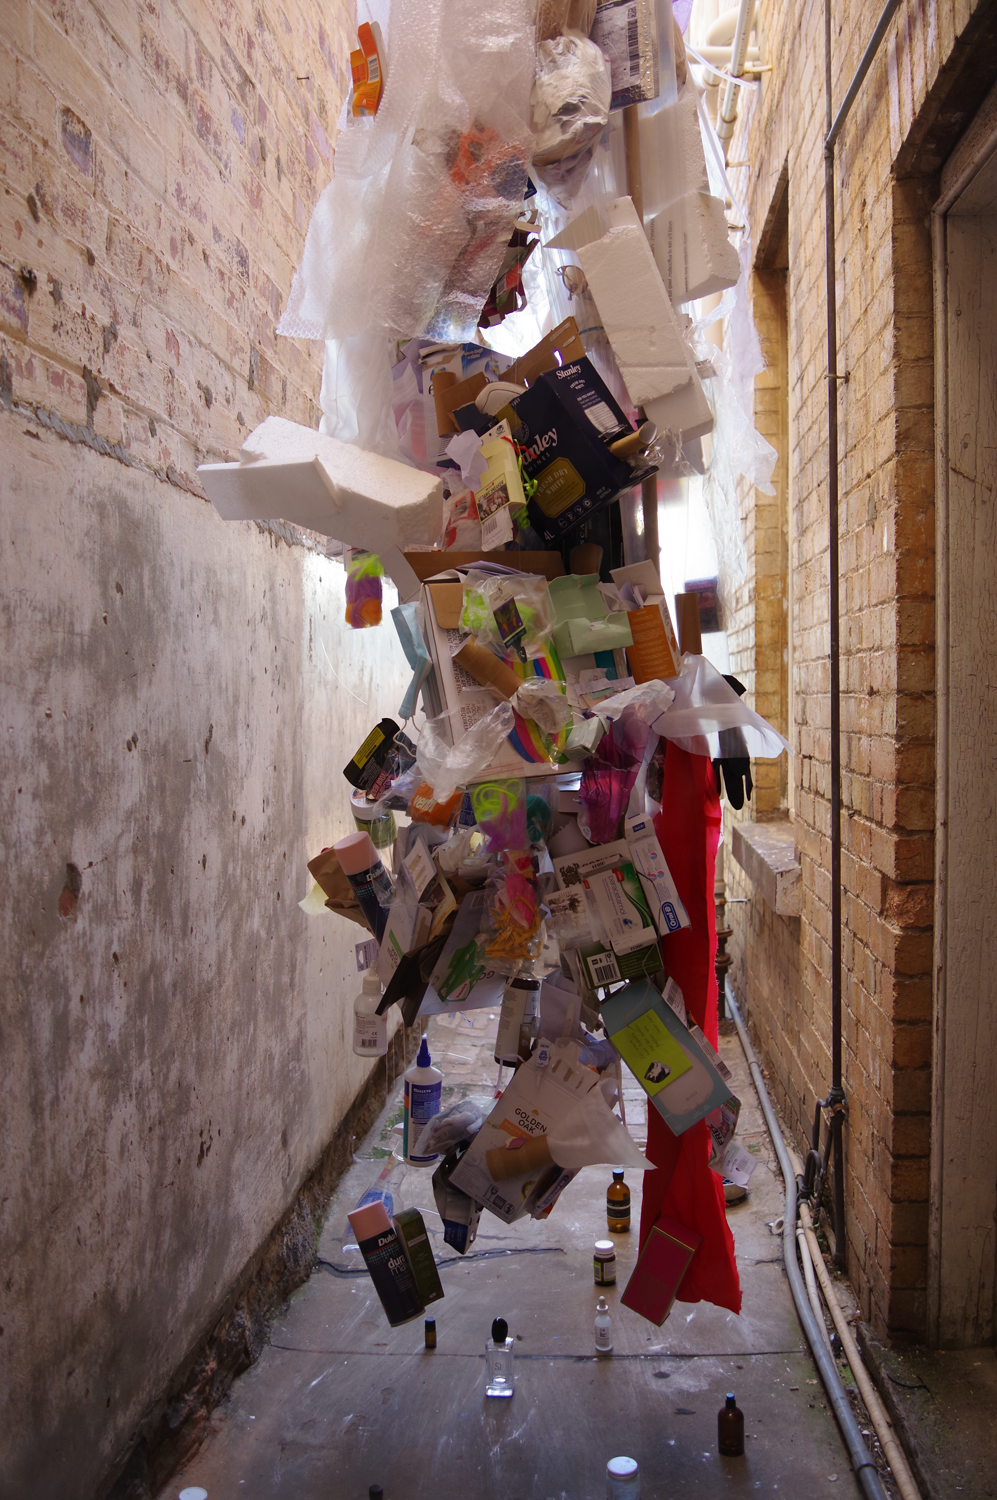 Photo of rubbish with daylight behind it.